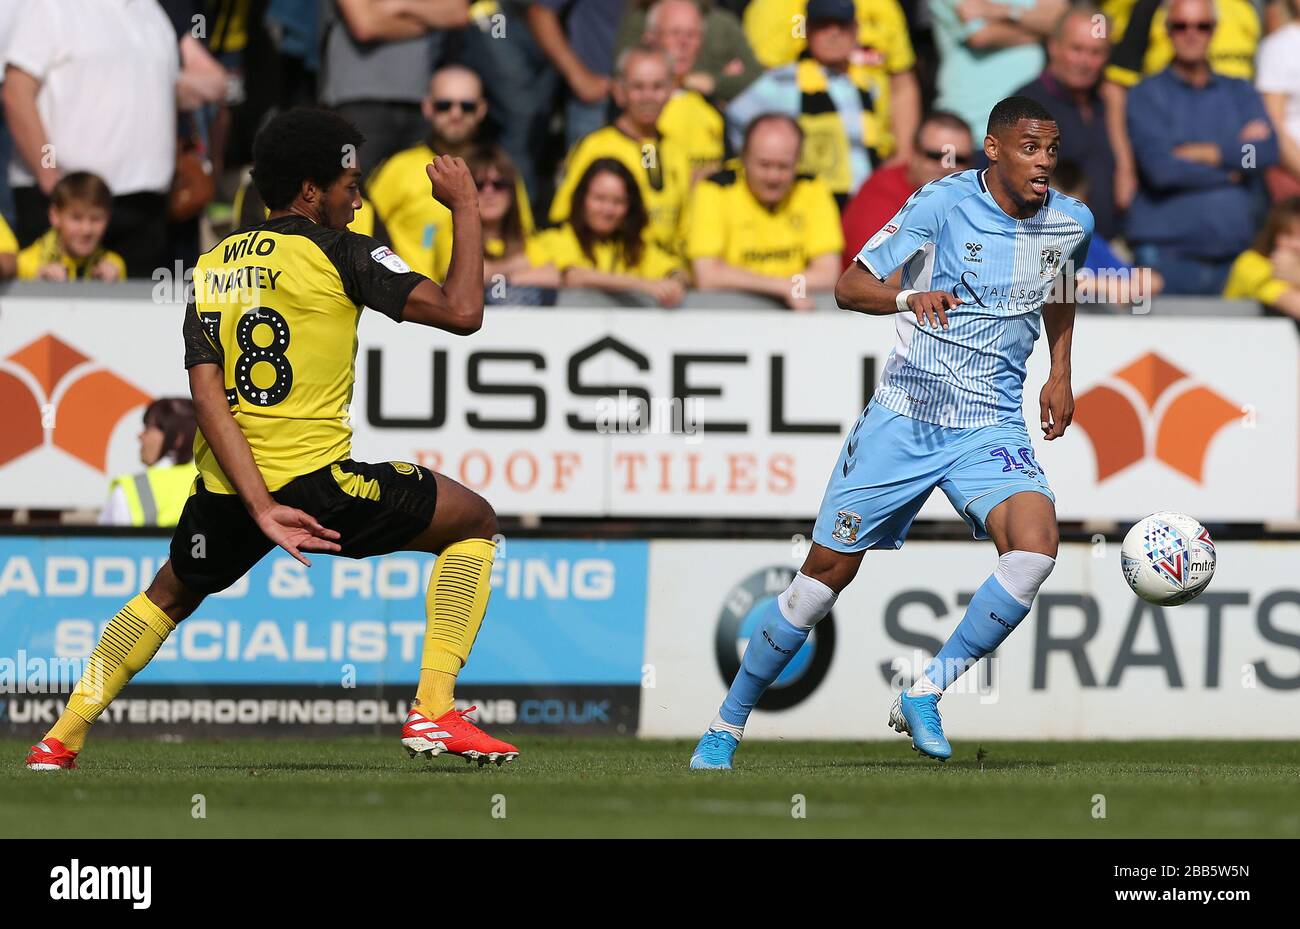 Burton Albion's Richard Narty and Coventry City's Wesley Jobello during the Sky Bet League One match at the Pirelli Stadium Stock Photo